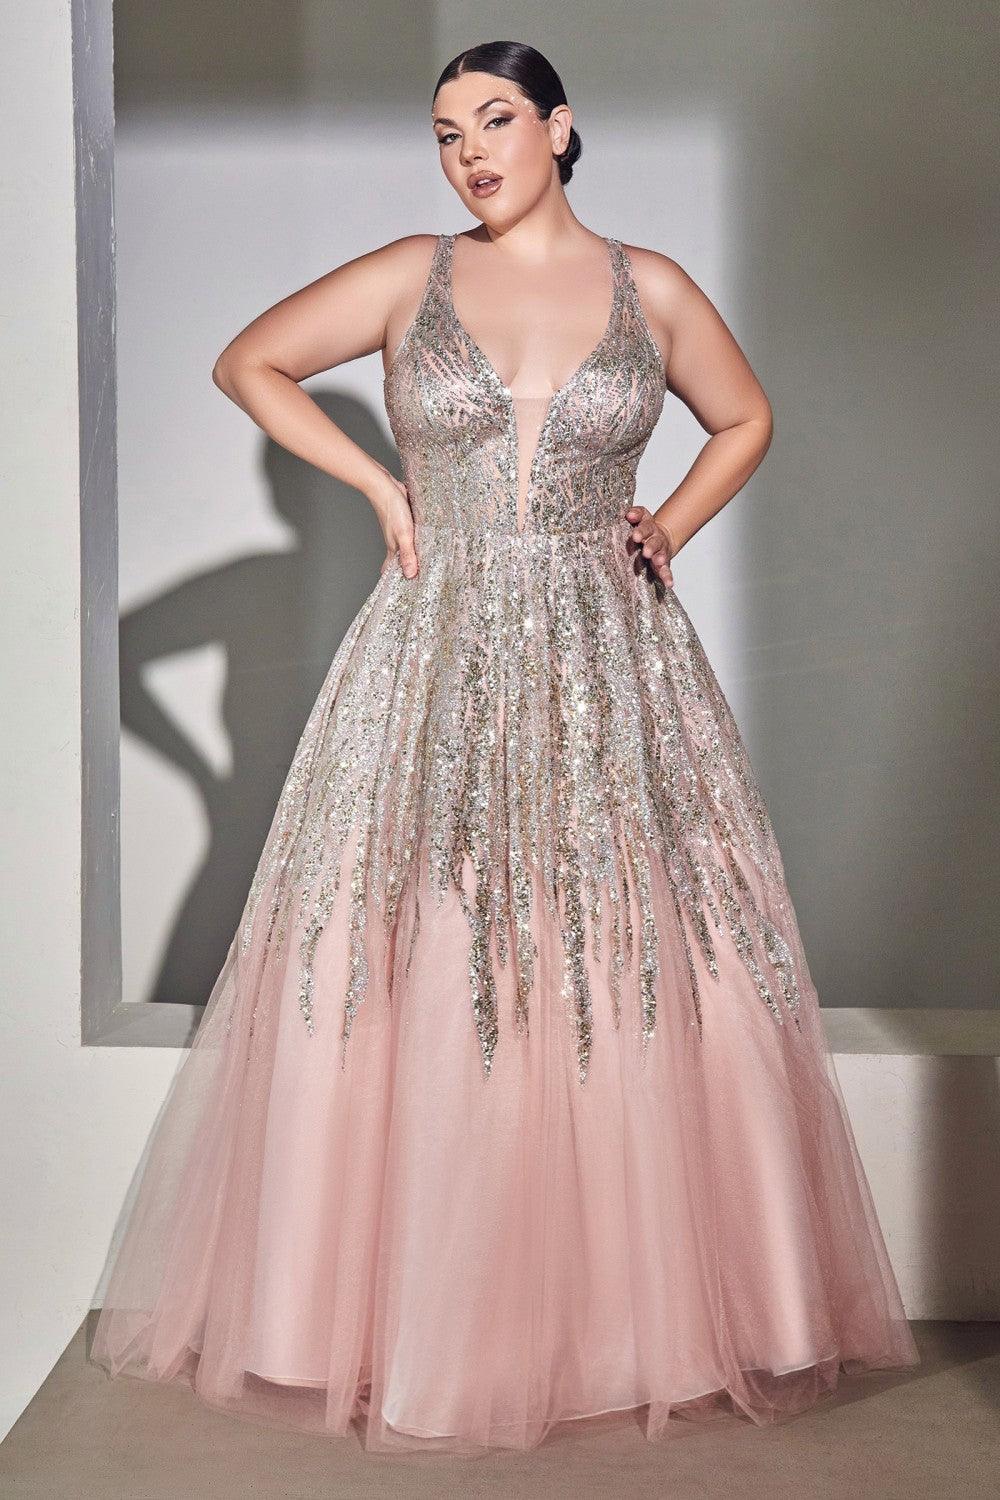 Glittered Long Sleeveless Prom Plus Size Dress - The Dress Outlet